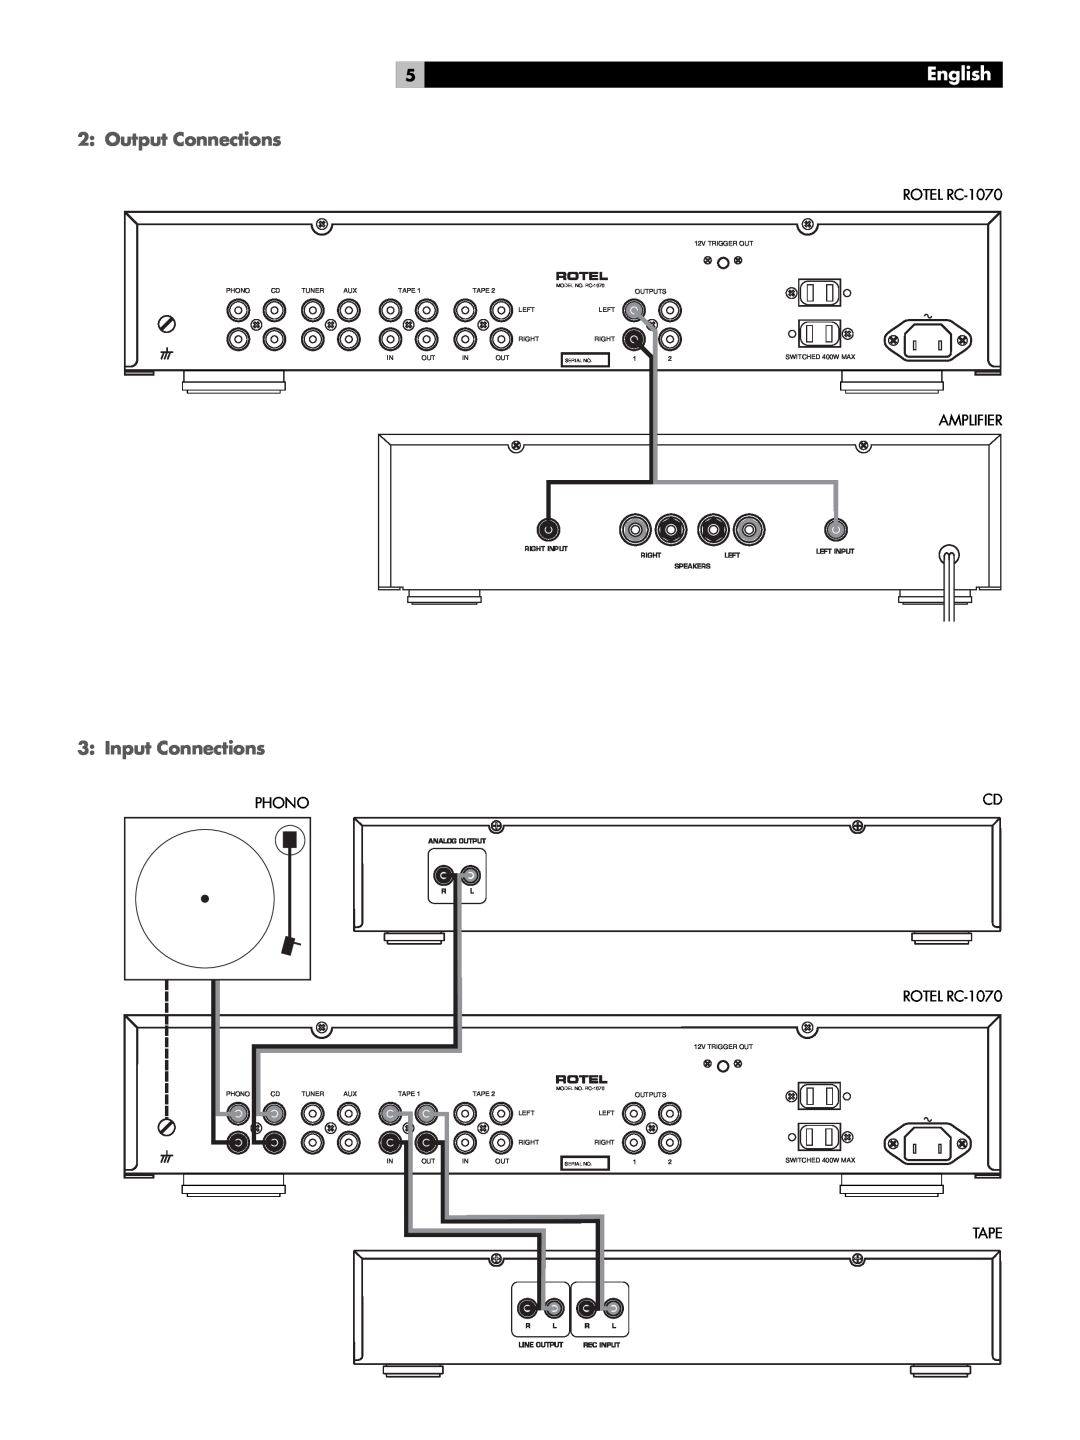 Rotel owner manual Output Connections, Input Connections, English, ROTEL RC-1070, Amplifier, Phono, Tape 